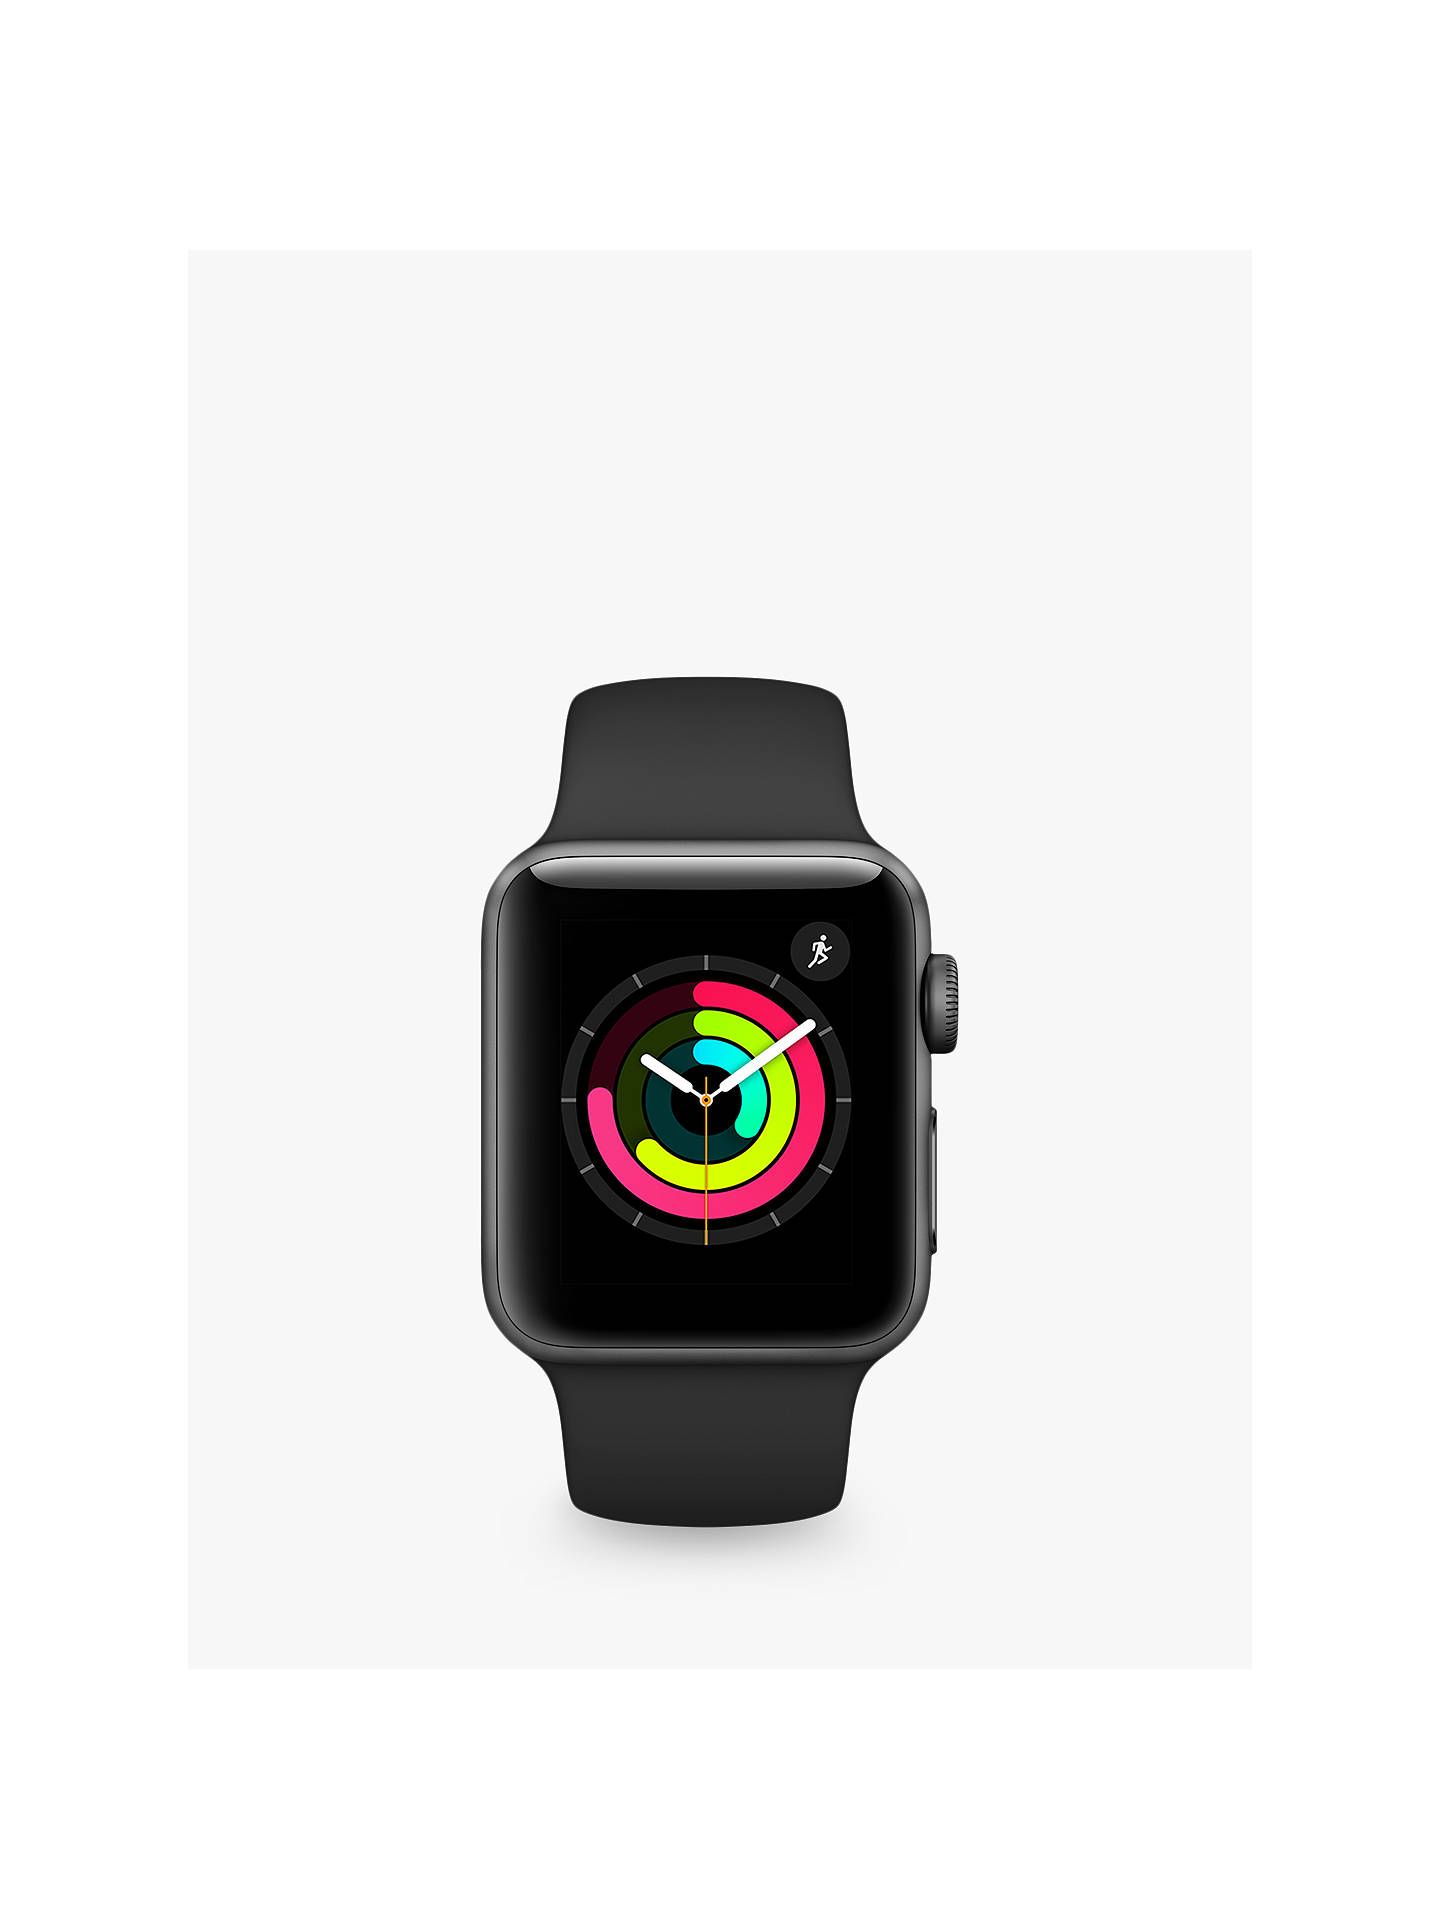 Apple Watch Series 3 Gps 38mm Space Grey Aluminium Case With Sport Band Black At John Lewis Partners